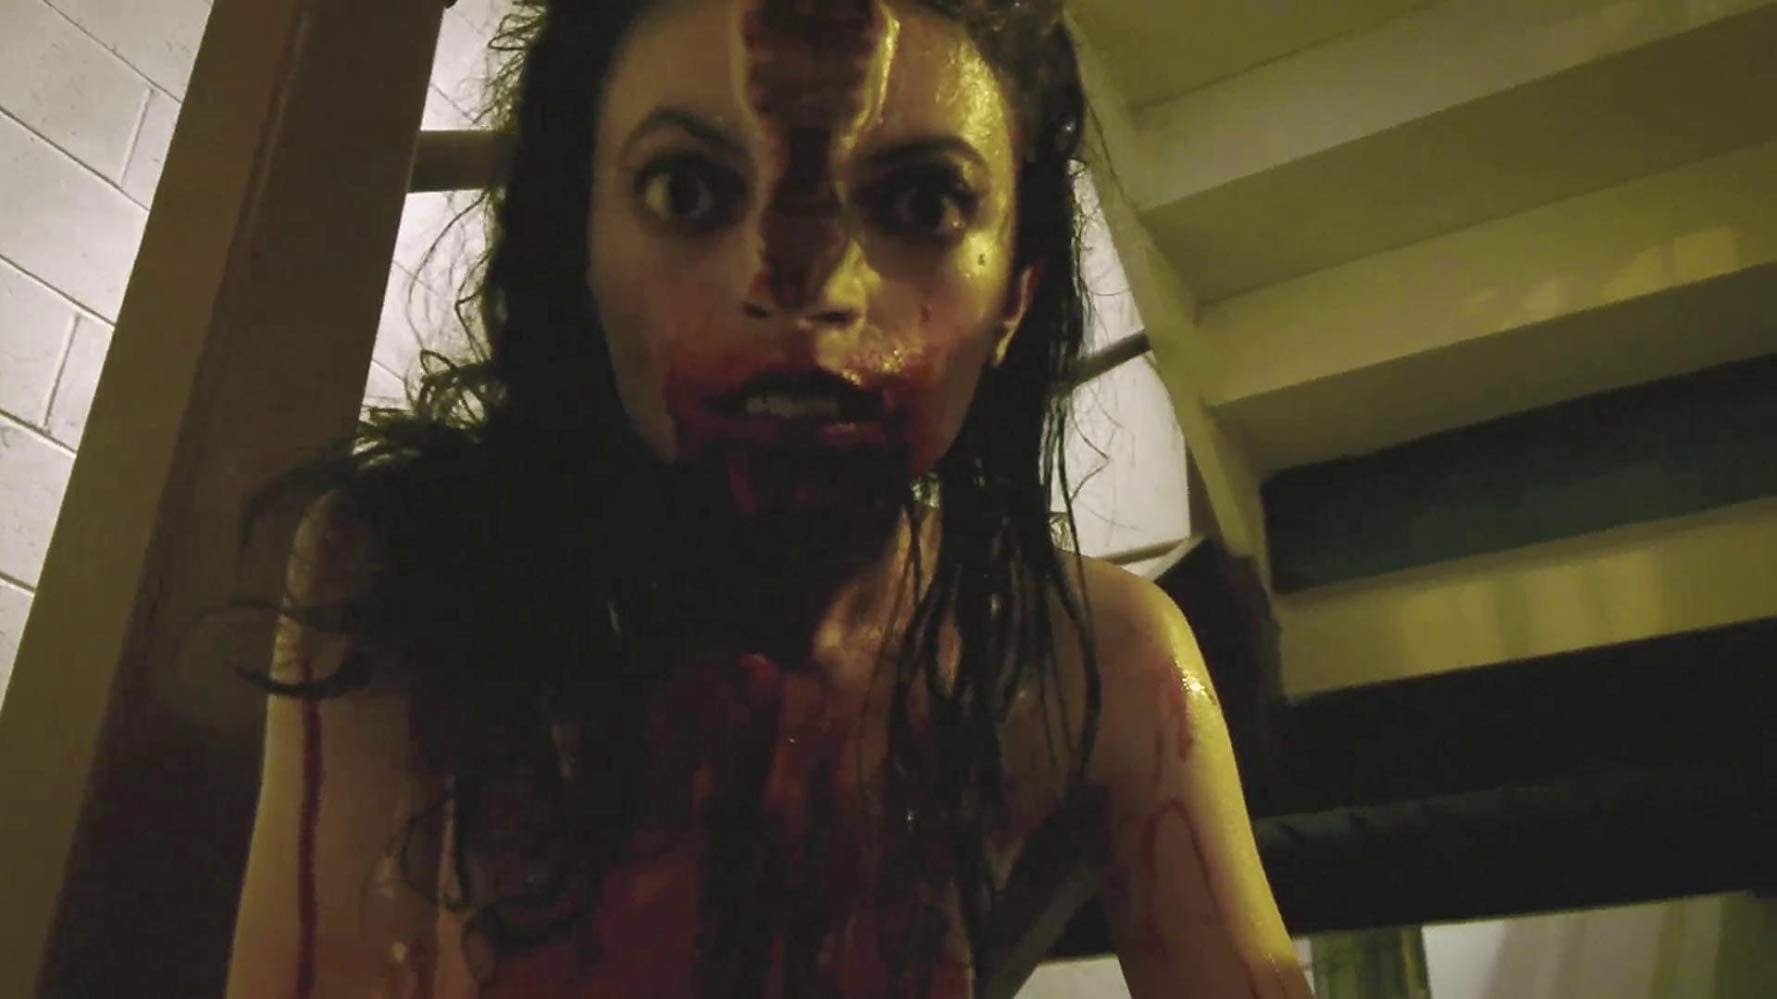 Top 10 Horror Films of the Decade Worth Revisiting